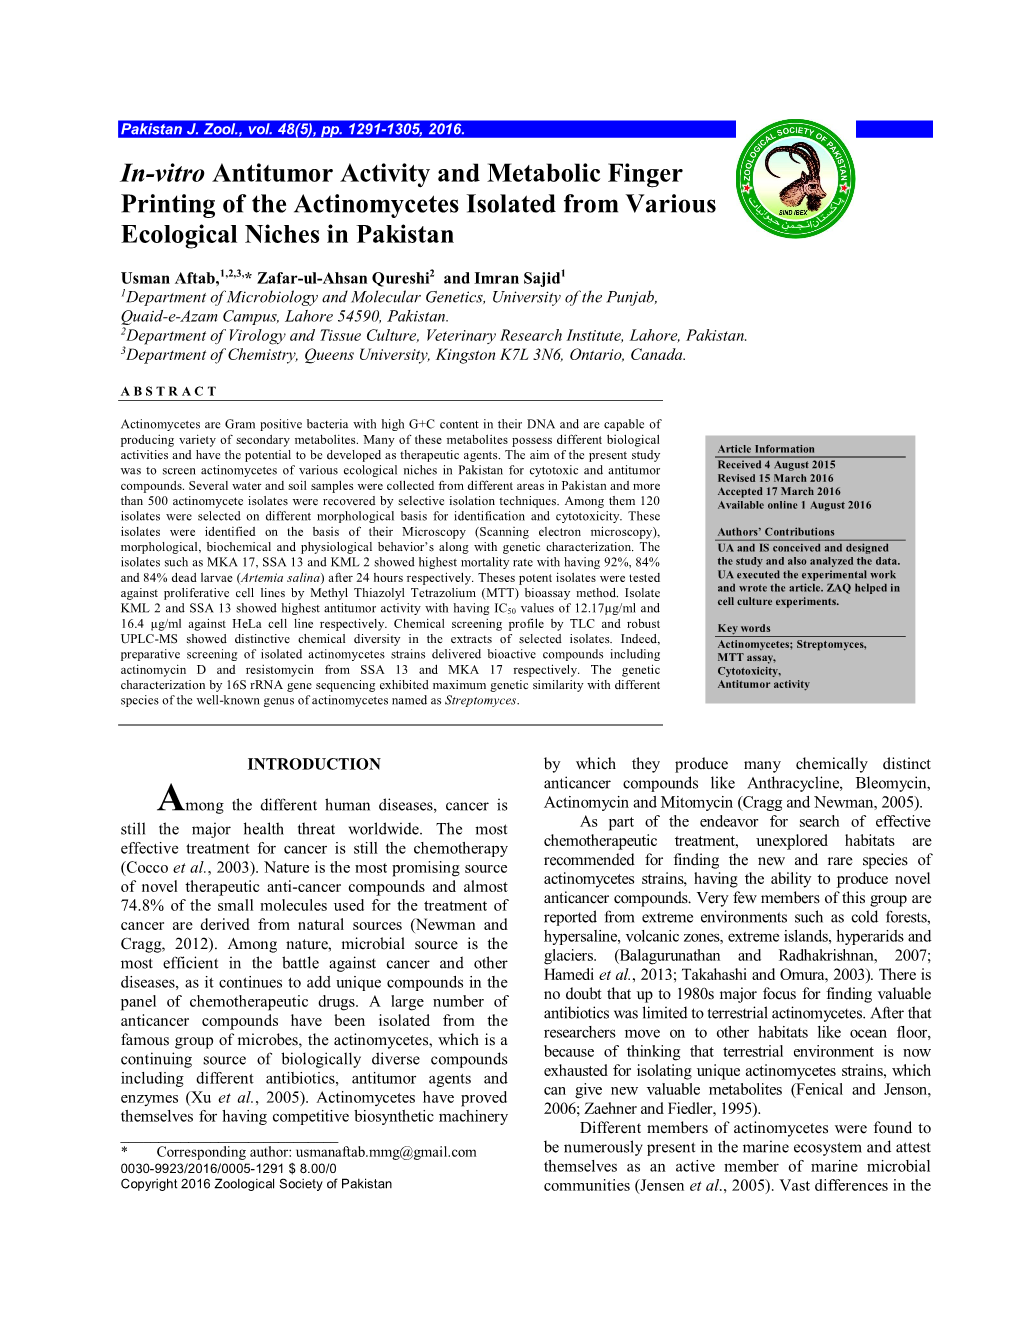 In-Vitro Antitumor Activity and Metabolic Finger Printing of the Actinomycetes Isolated from Various Ecological Niches in Pakistan